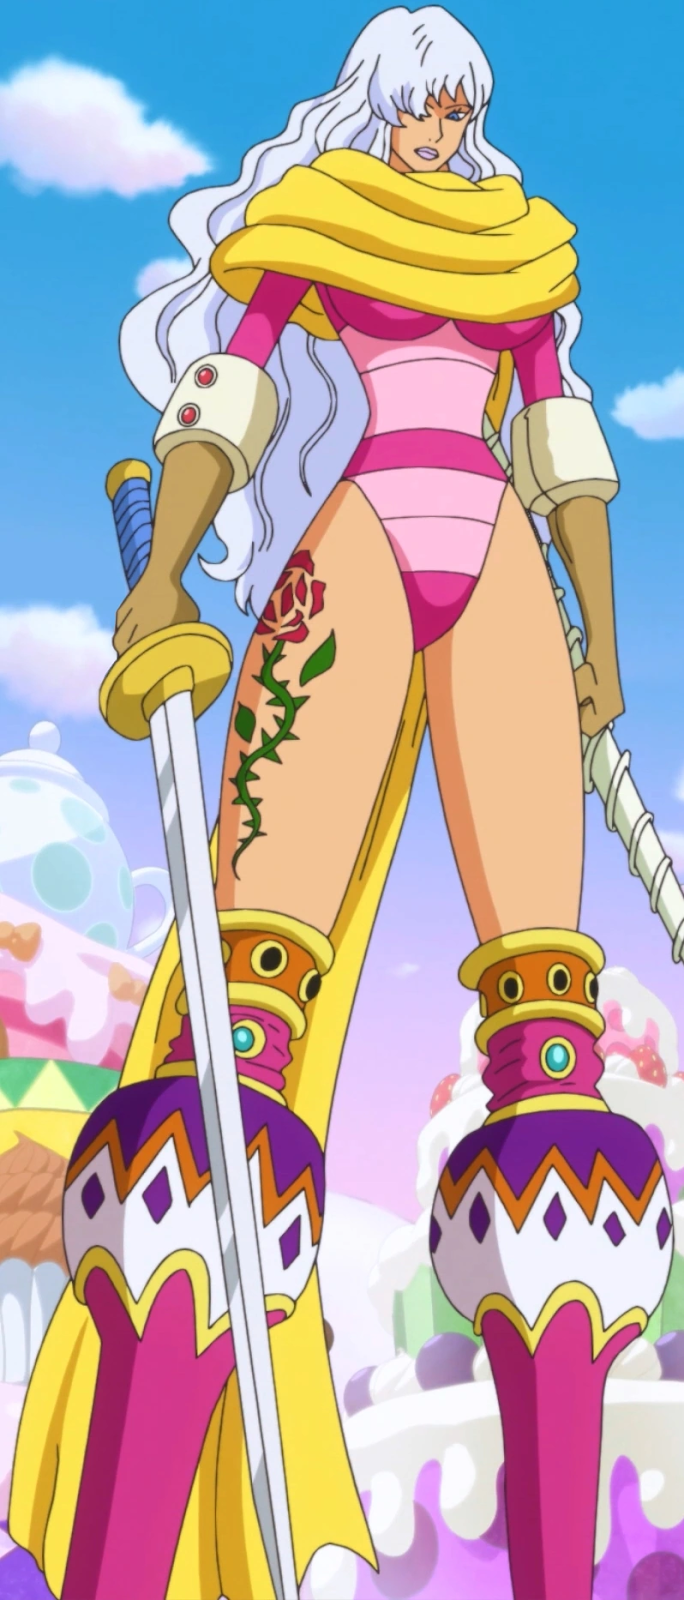 Charlotte Smoothie in One Piece.